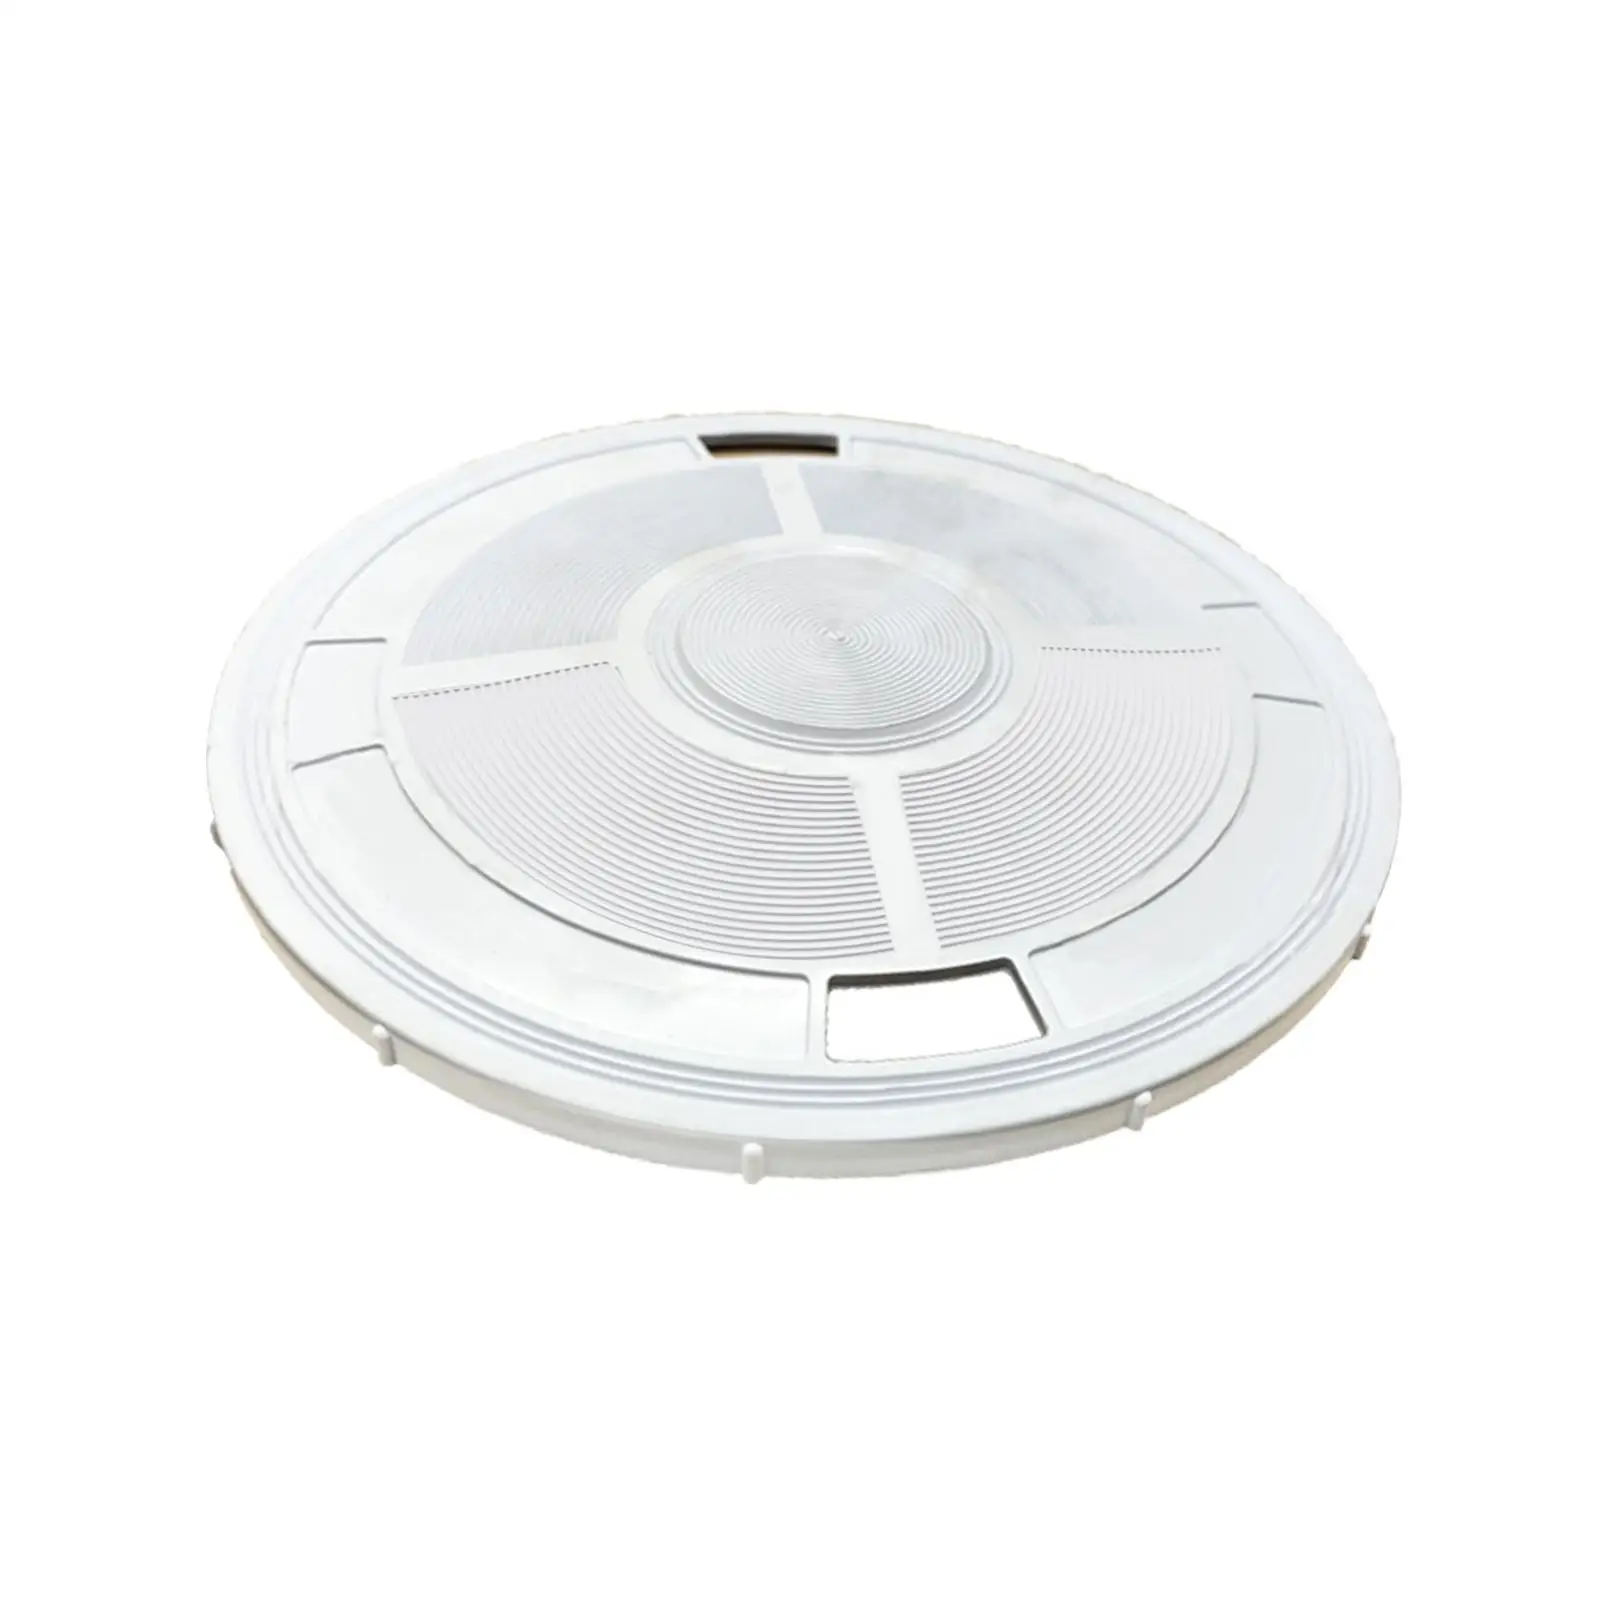 Pool Skimmer Lid Replacement Pool Maintenance for SP1091LX above Ground Pool